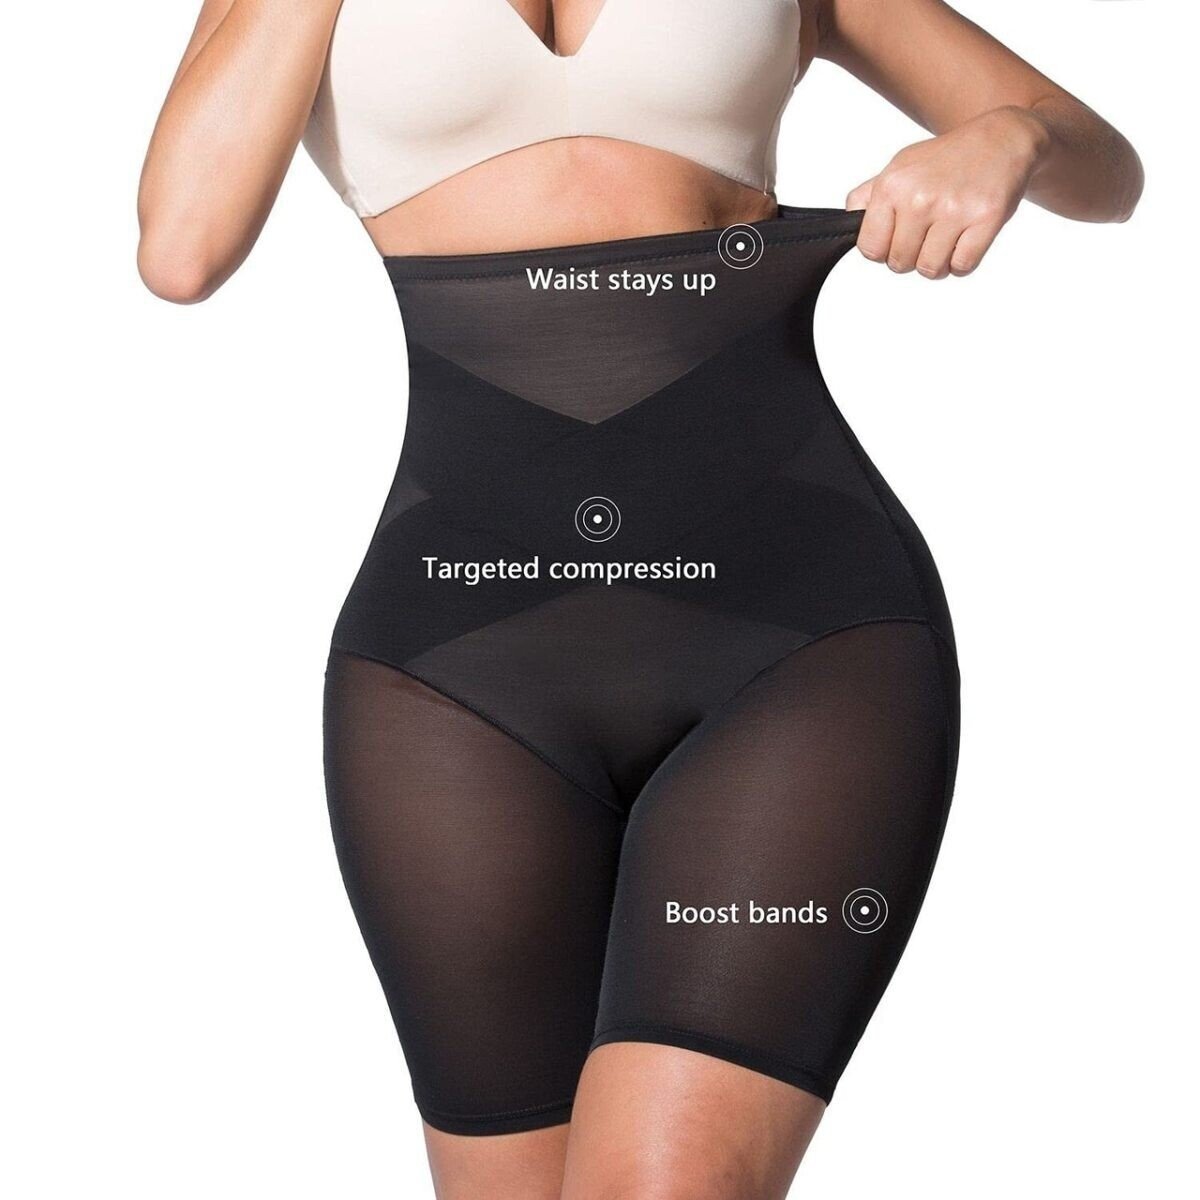 CROSS COMPRESSION ABS & BOOTY HIGH WAISTED SHAPER